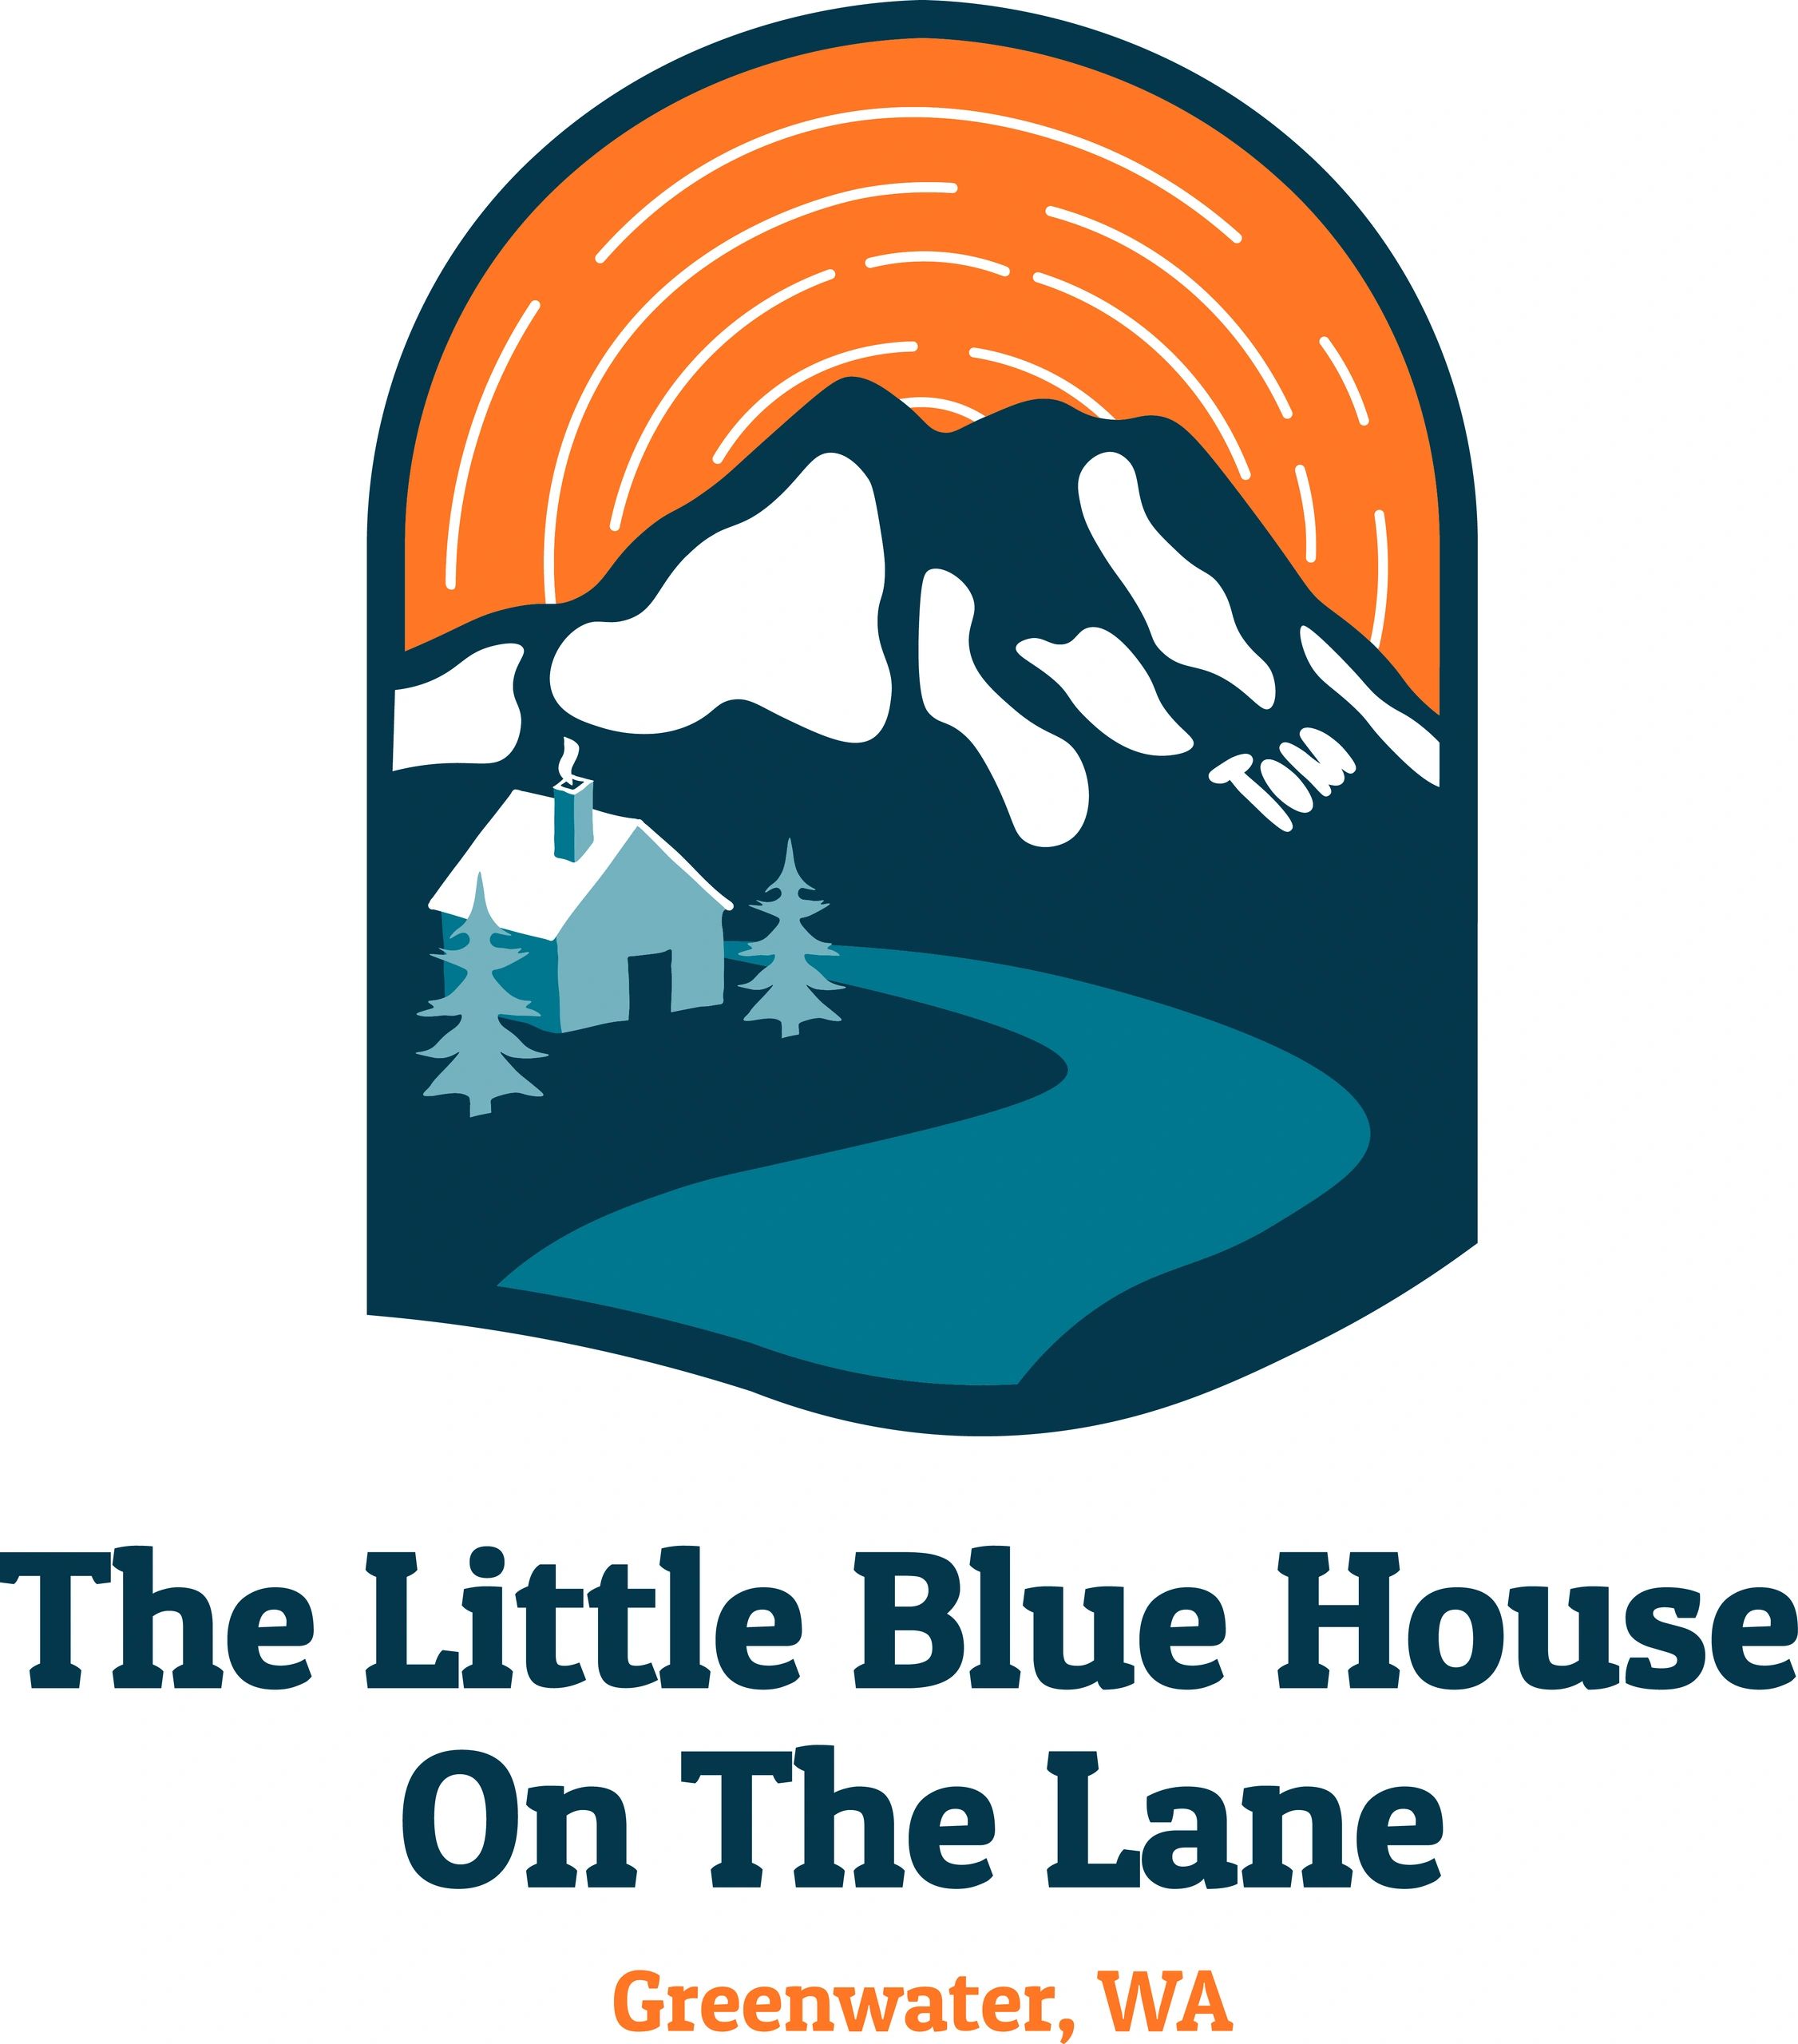 The little blue house on the Lane